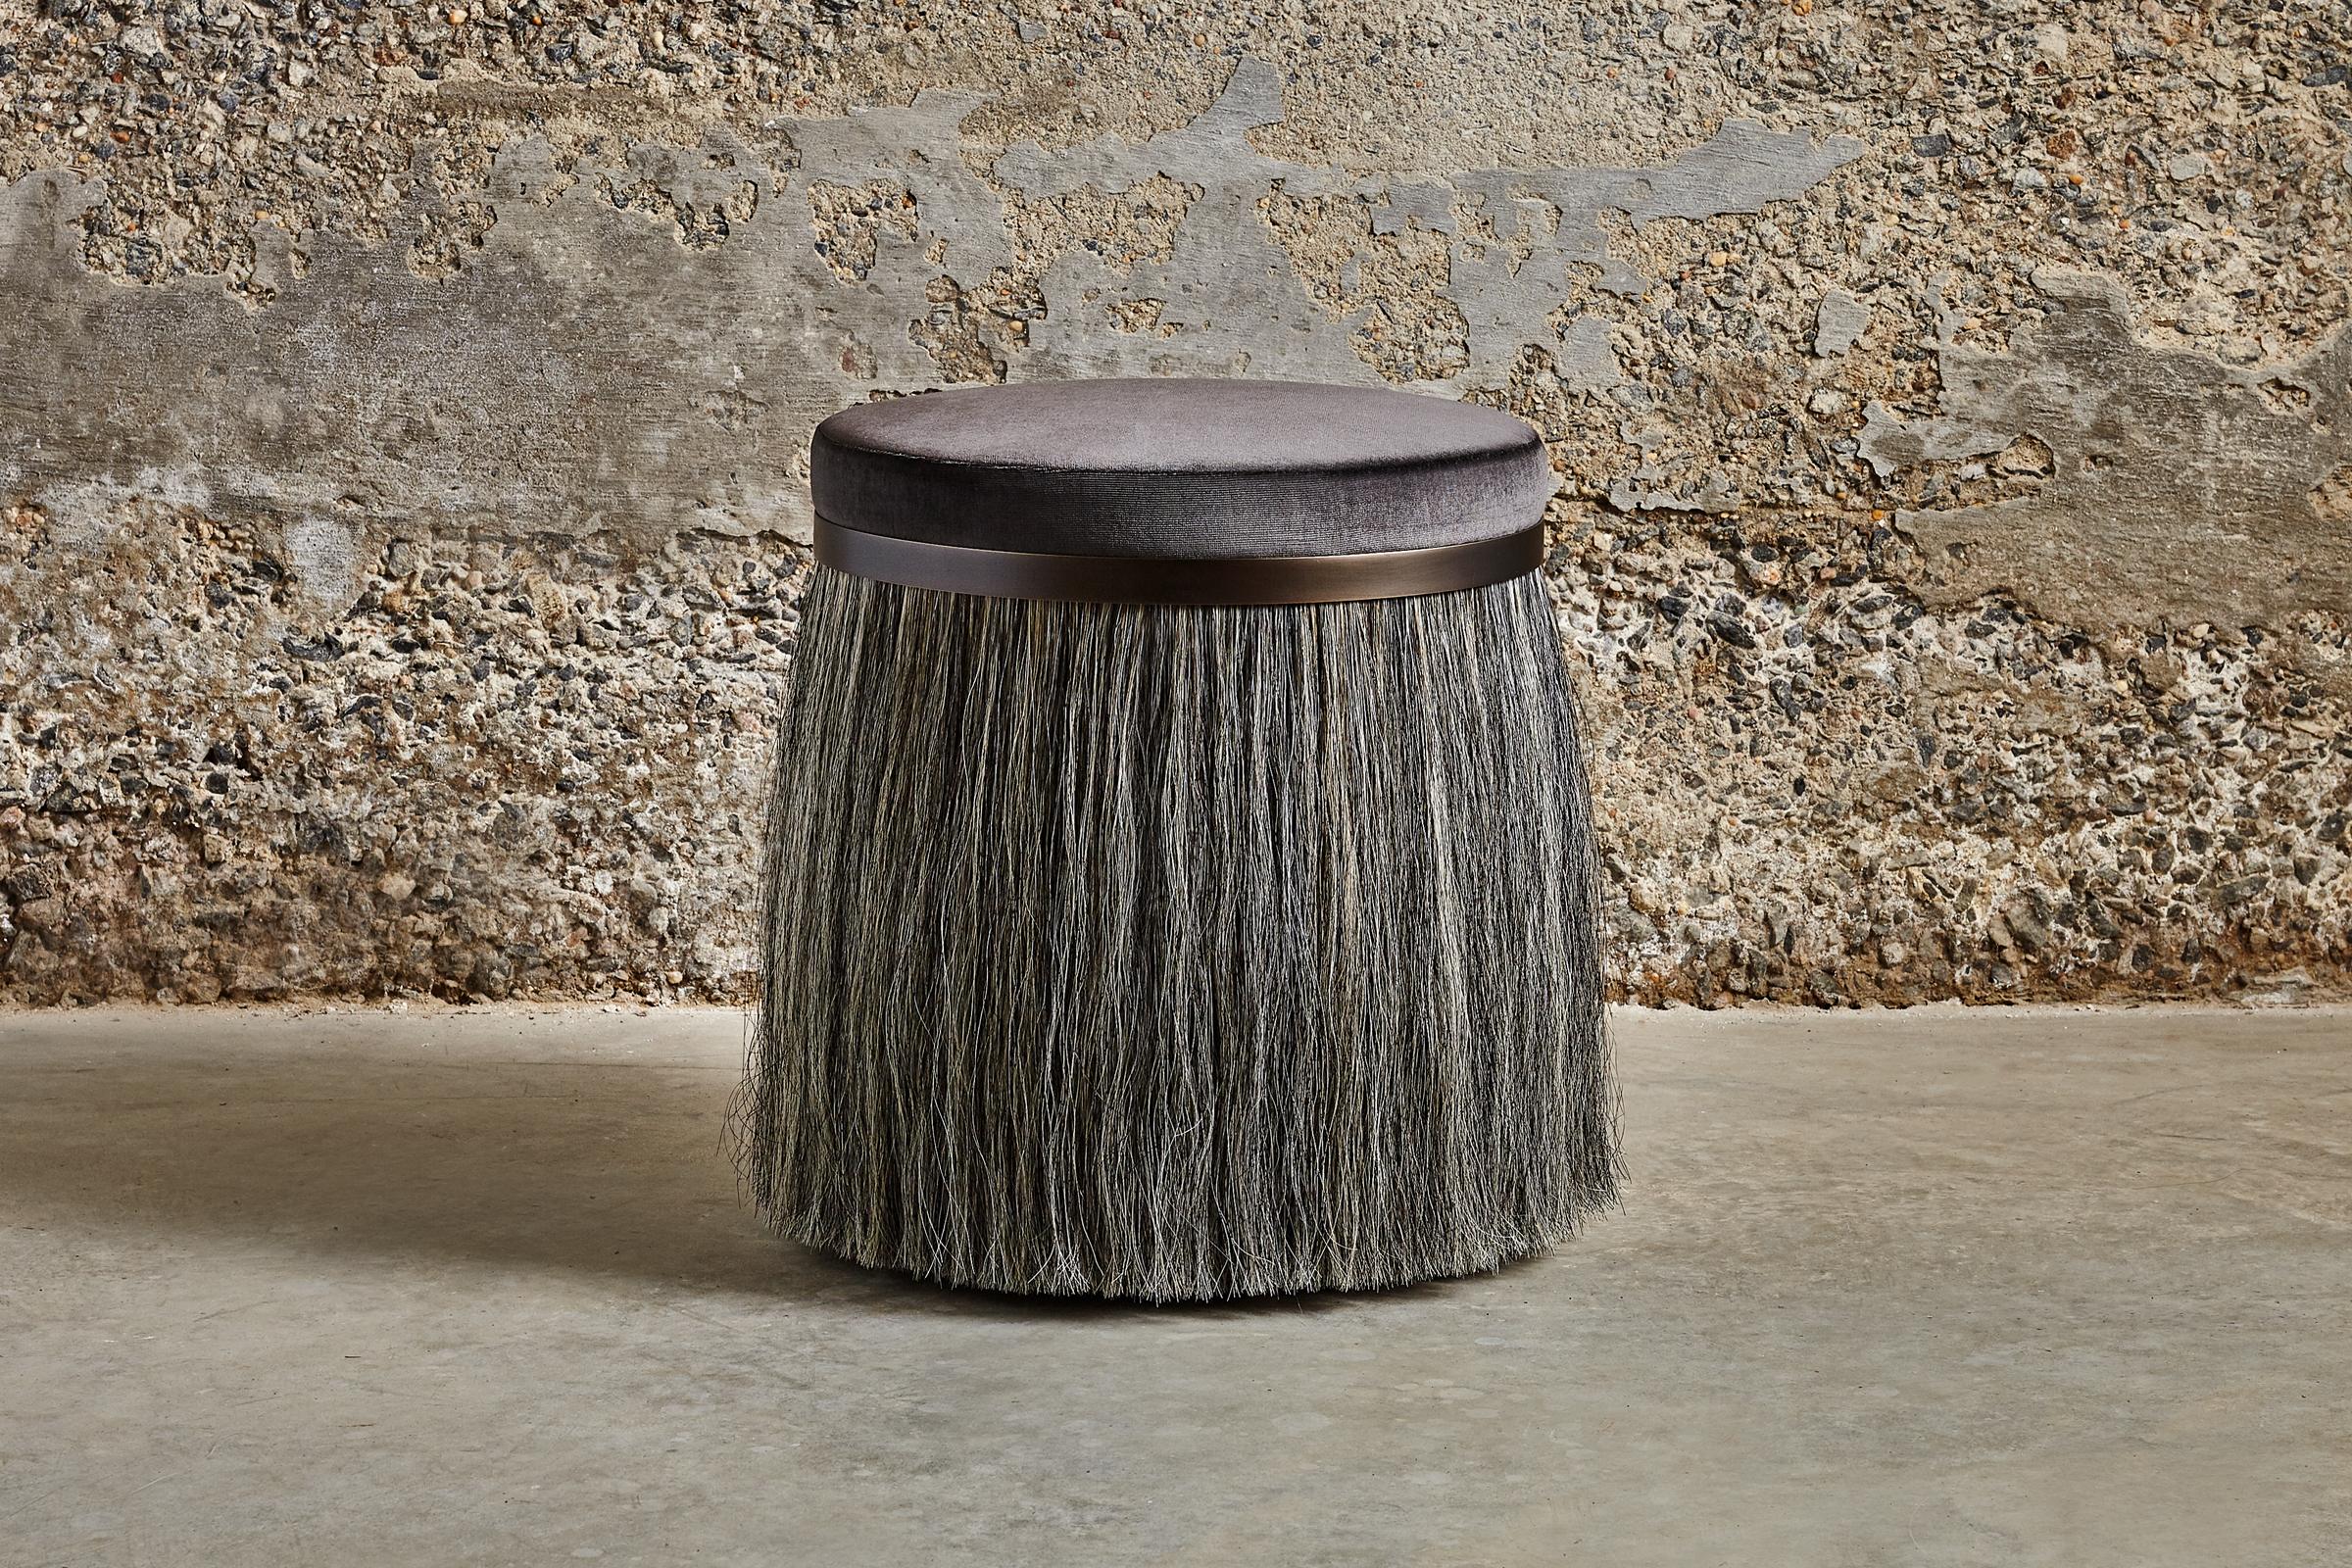 The Thing stools are available in four different styles and feature hand-upholstered tops, solid brass rings and horse hair. Refined yet wild, Thing 1's unique personality is accentuated with a distinctive combination of contrasting materials.